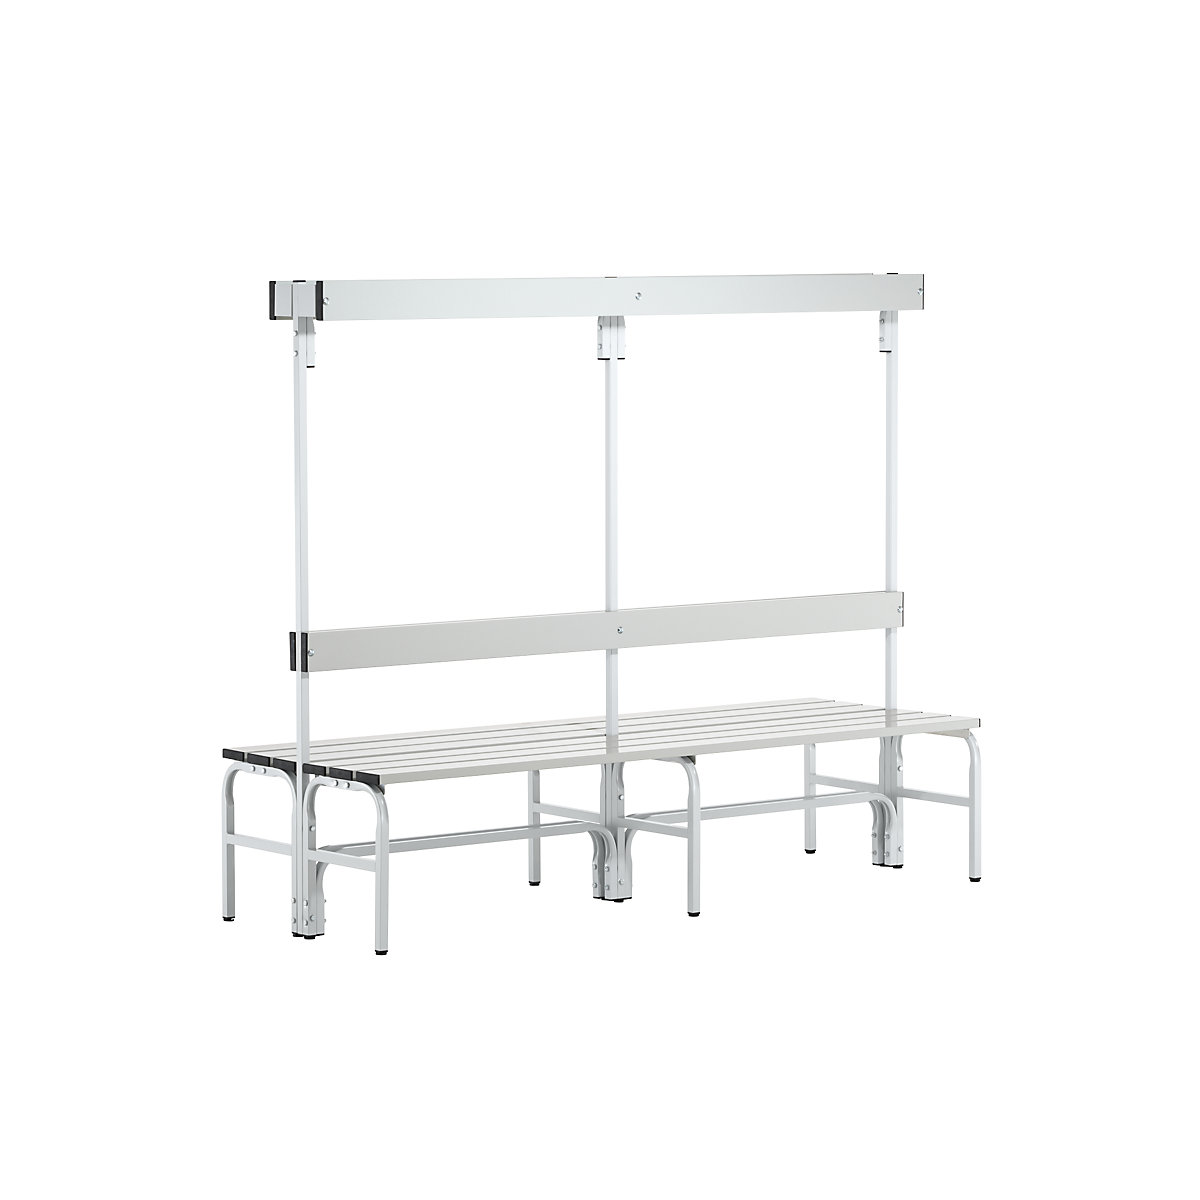 Sypro – Changing room bench made of stainless steel, HxD 1650 x 725 mm, length 1500 mm, 12 hooks, light grey